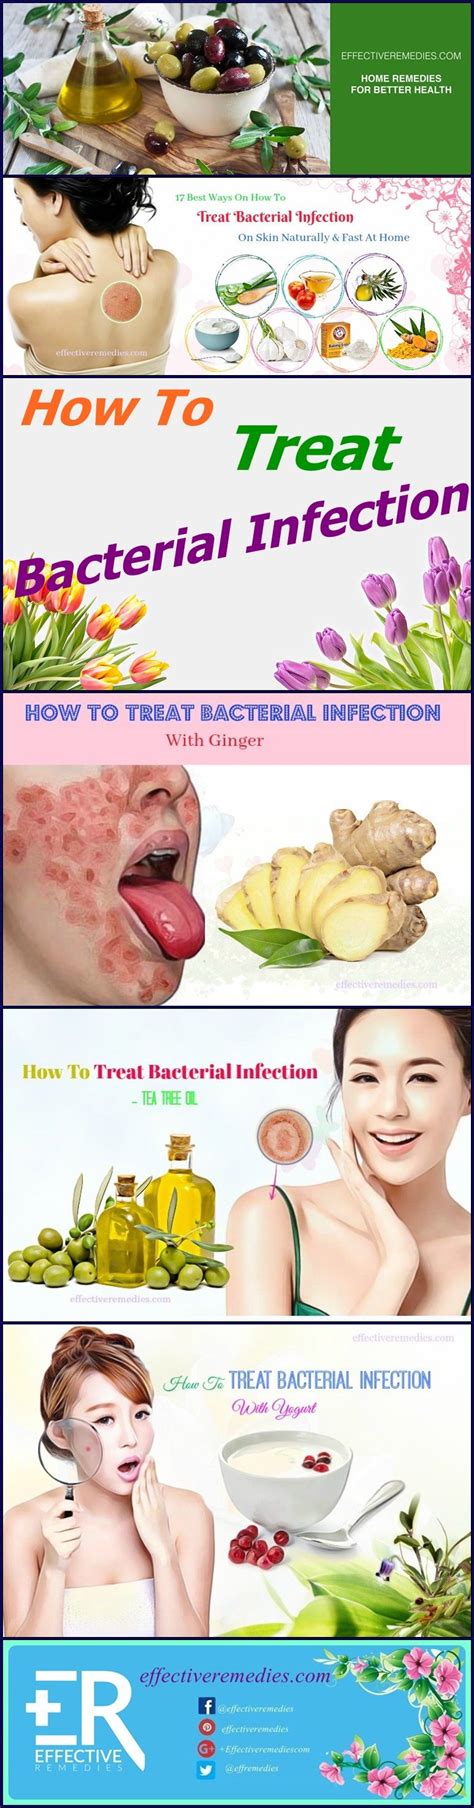 17 Best Ways To Treat Bacterial Infection On Skin Naturally And Fast At